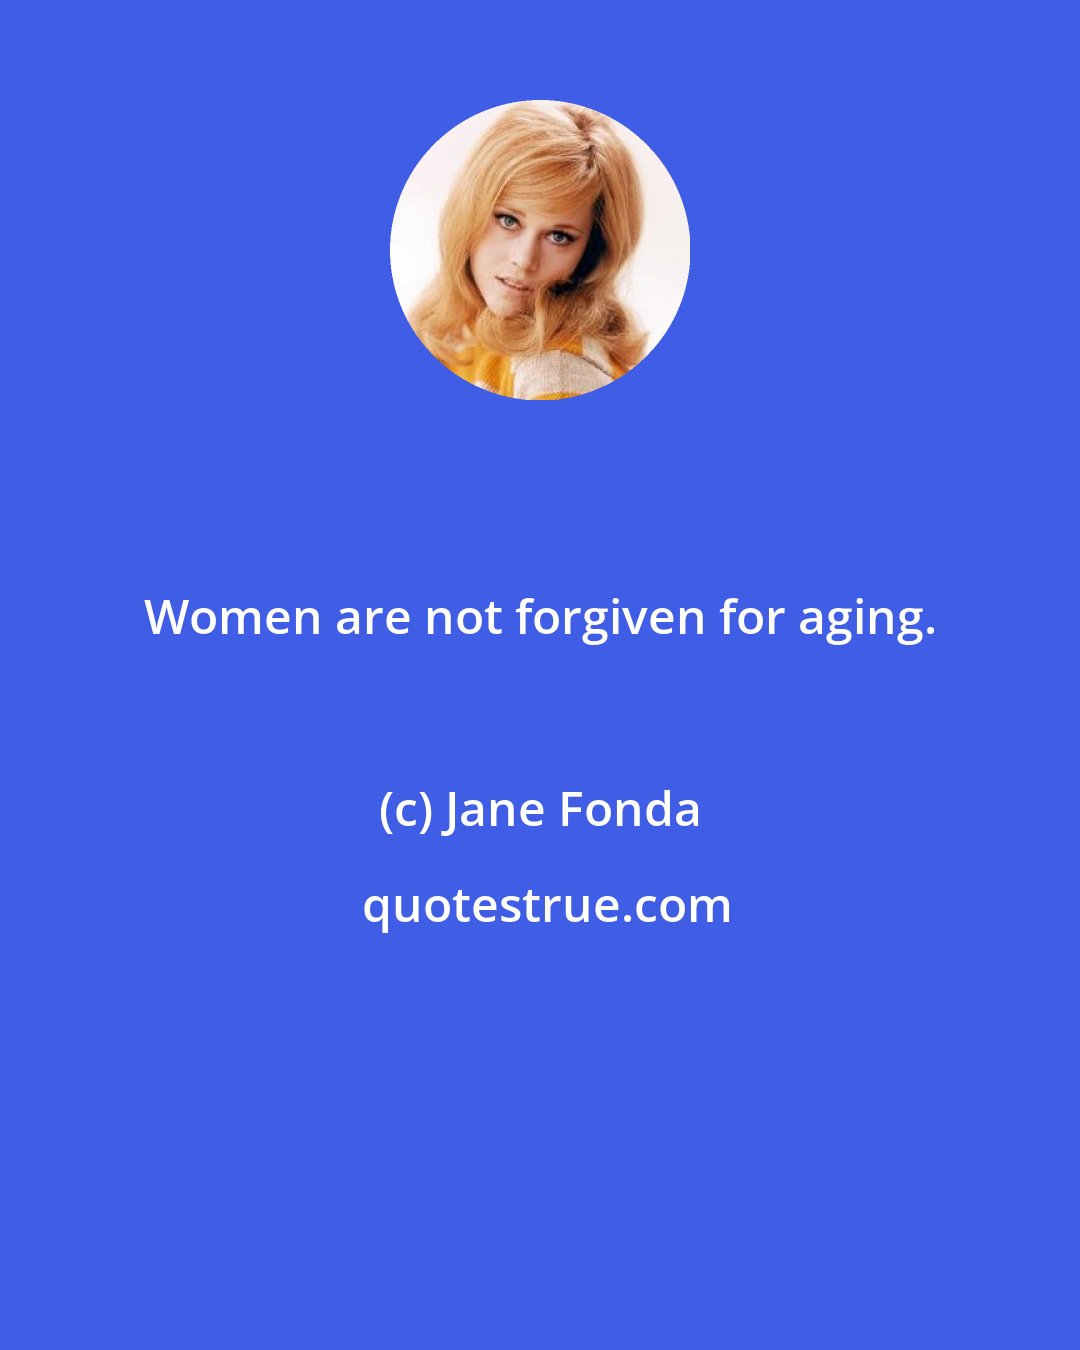 Jane Fonda: Women are not forgiven for aging.